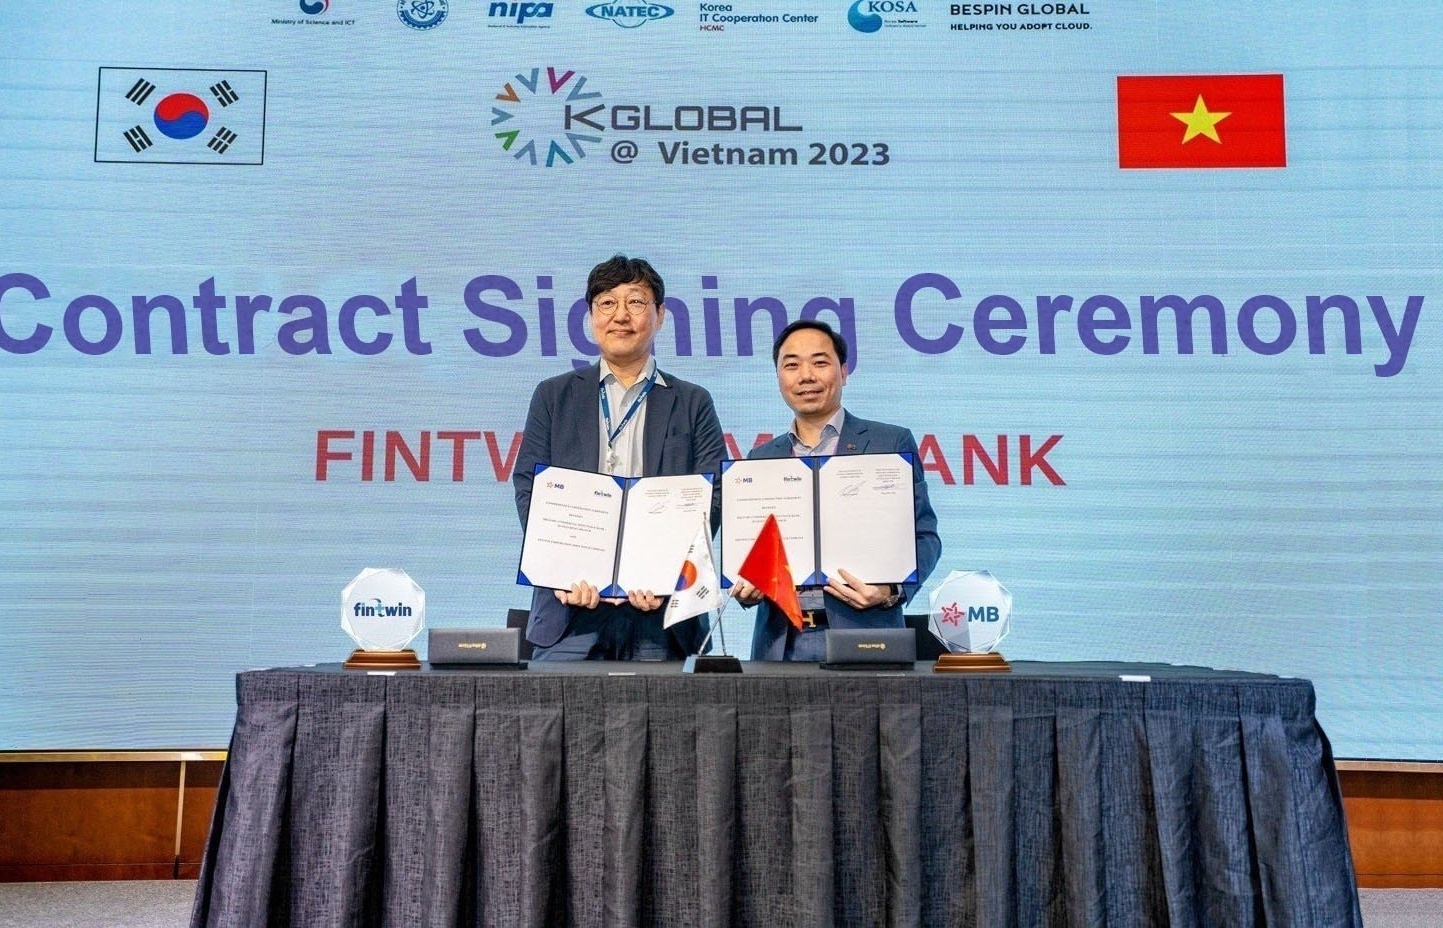 Fintwin expands network at K-Global event